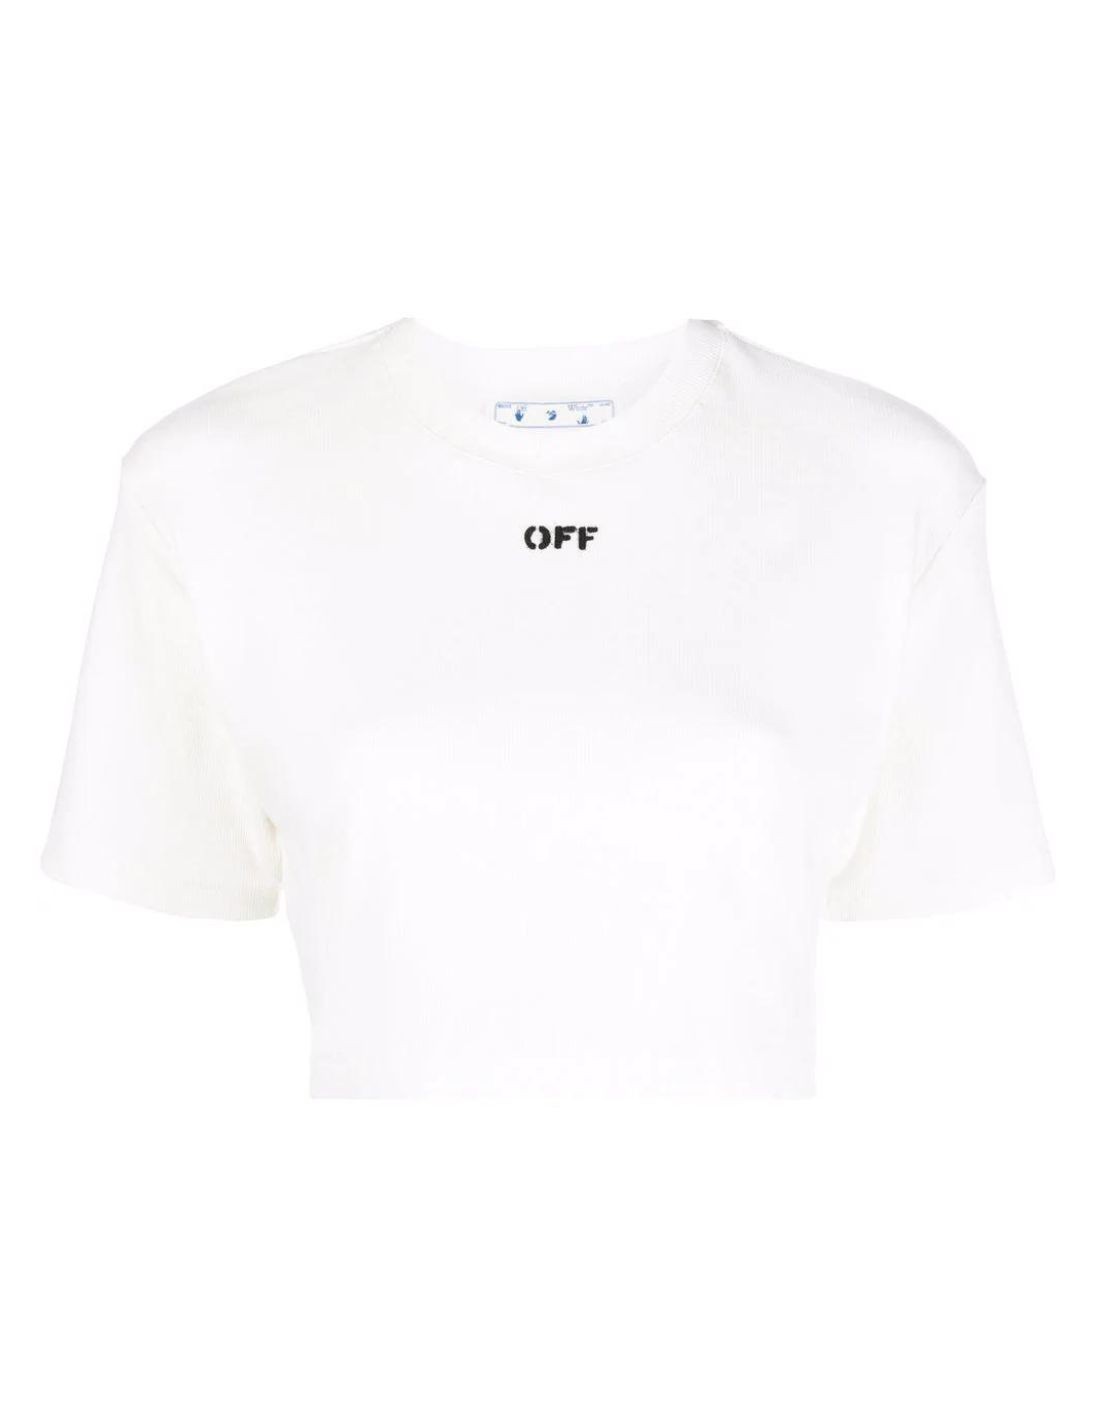 White crop top tee-shirt with 